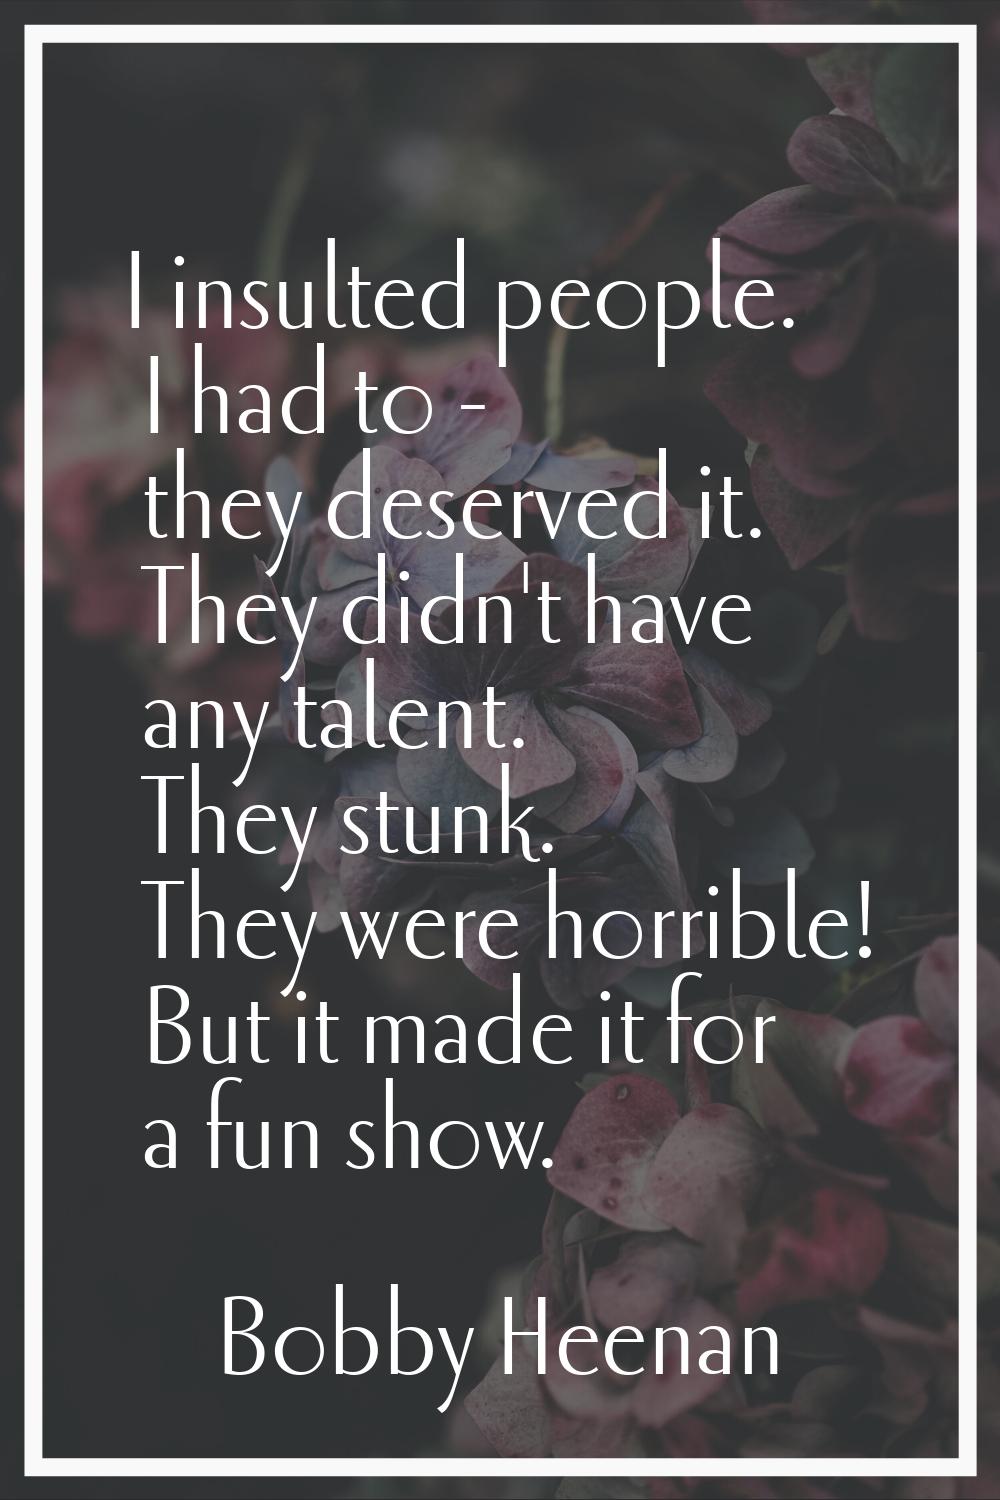 I insulted people. I had to - they deserved it. They didn't have any talent. They stunk. They were 